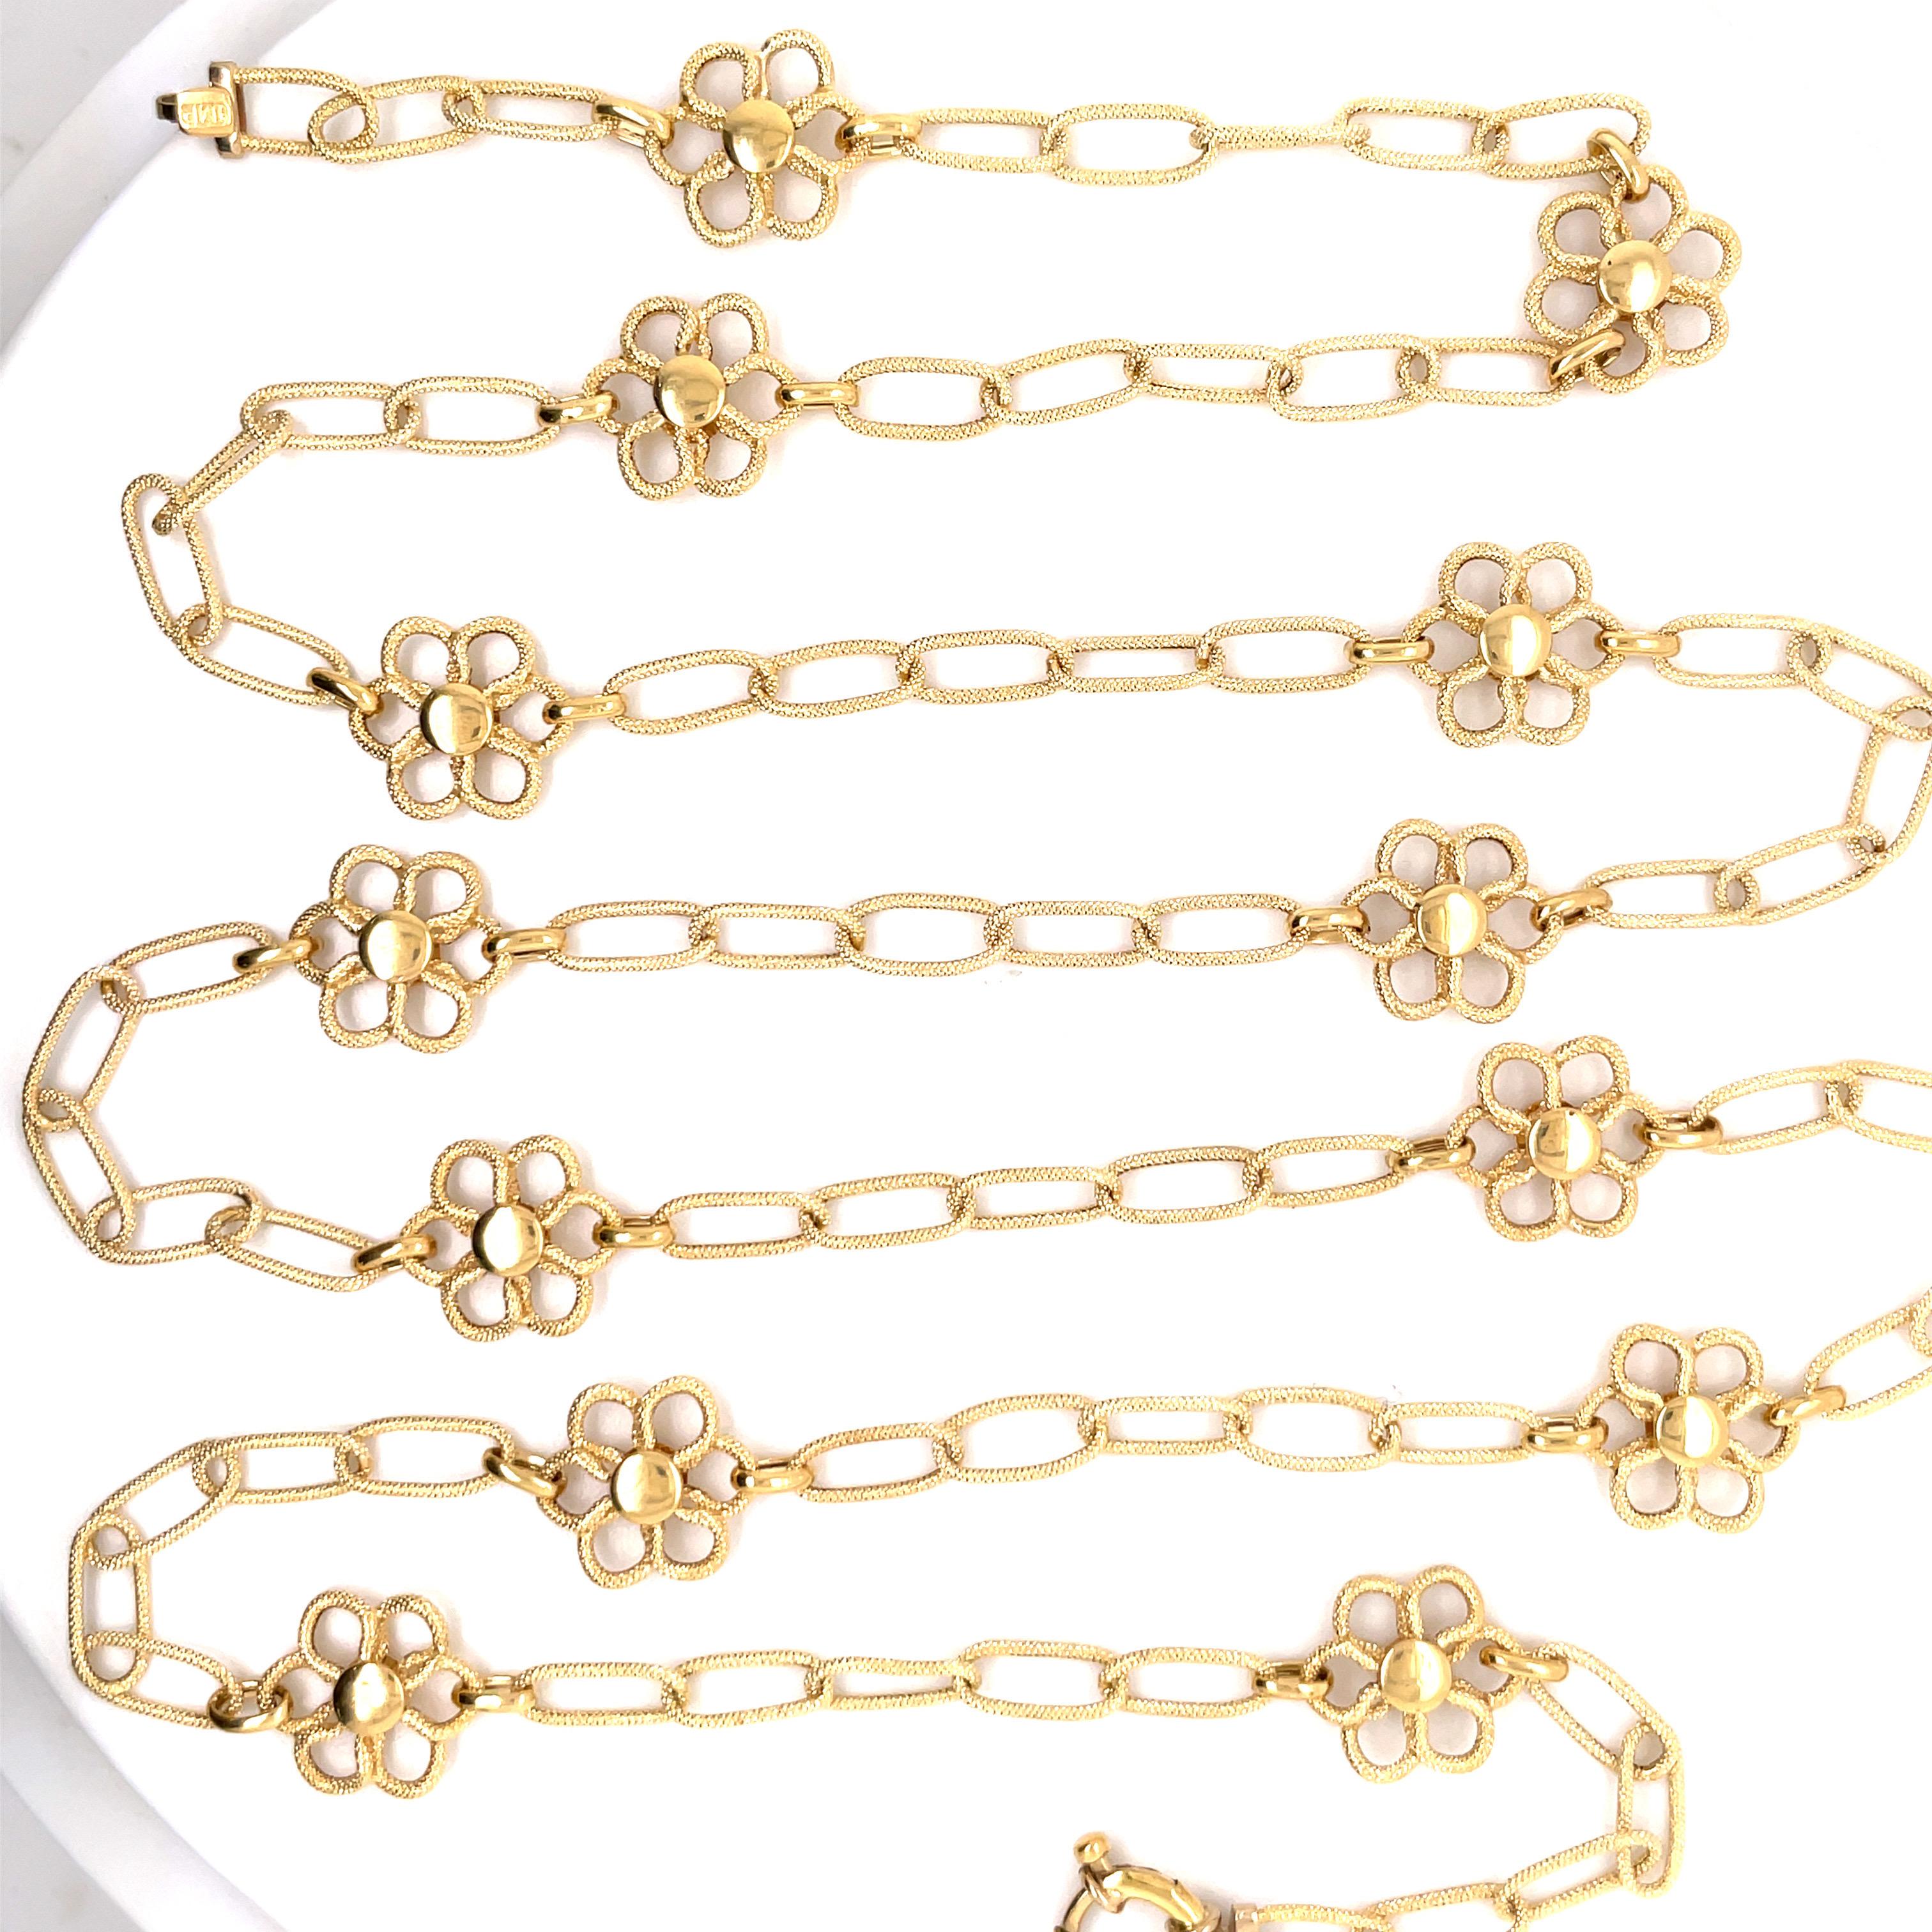 Stamped JMP ITALY 750, this 18 karat yellow gold necklace featuring 13 florals motifs in between oval links weighing 12.9 grams, 35.5 inches. 